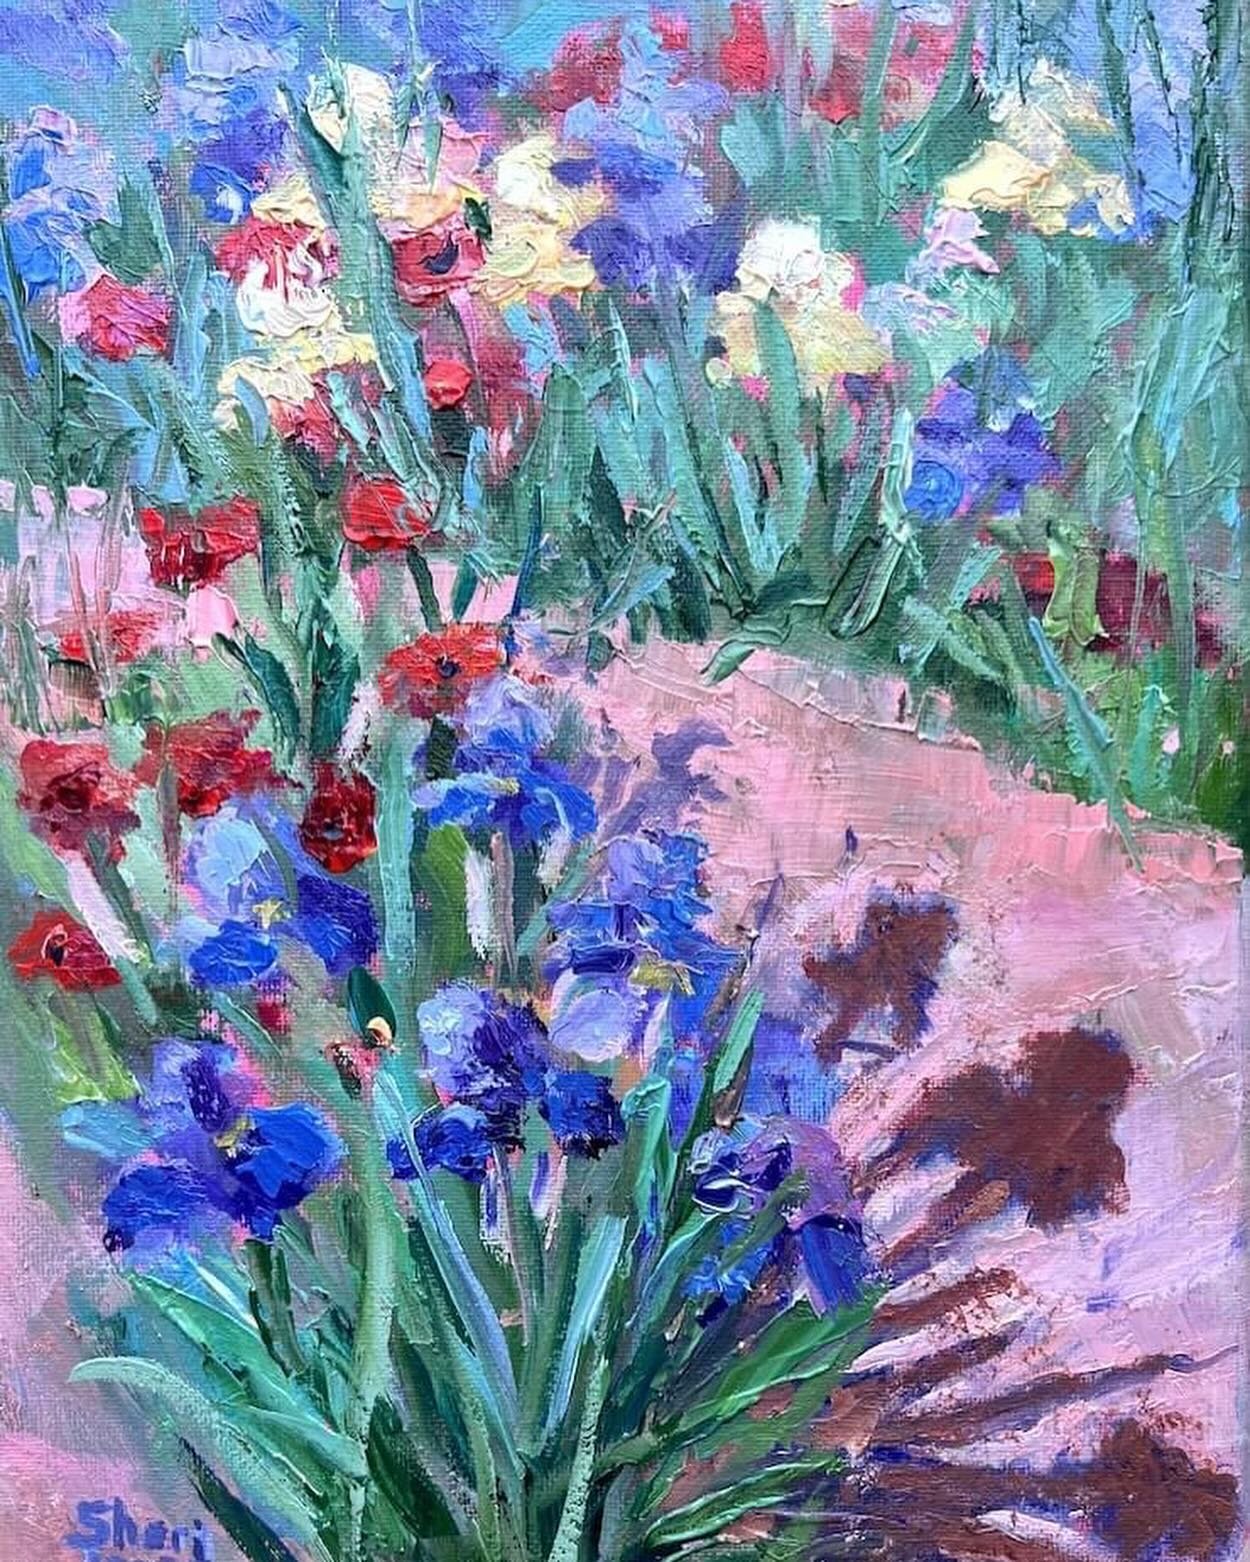 Floral Extraganza

12x9 oil on canvas

This piece was created en plein air at Lake Granbury Master Garden center. Featuring the vibrant spring colors I am drawn to.  The layers and visible strokes give the painting a lively, dynamic quality. It is an